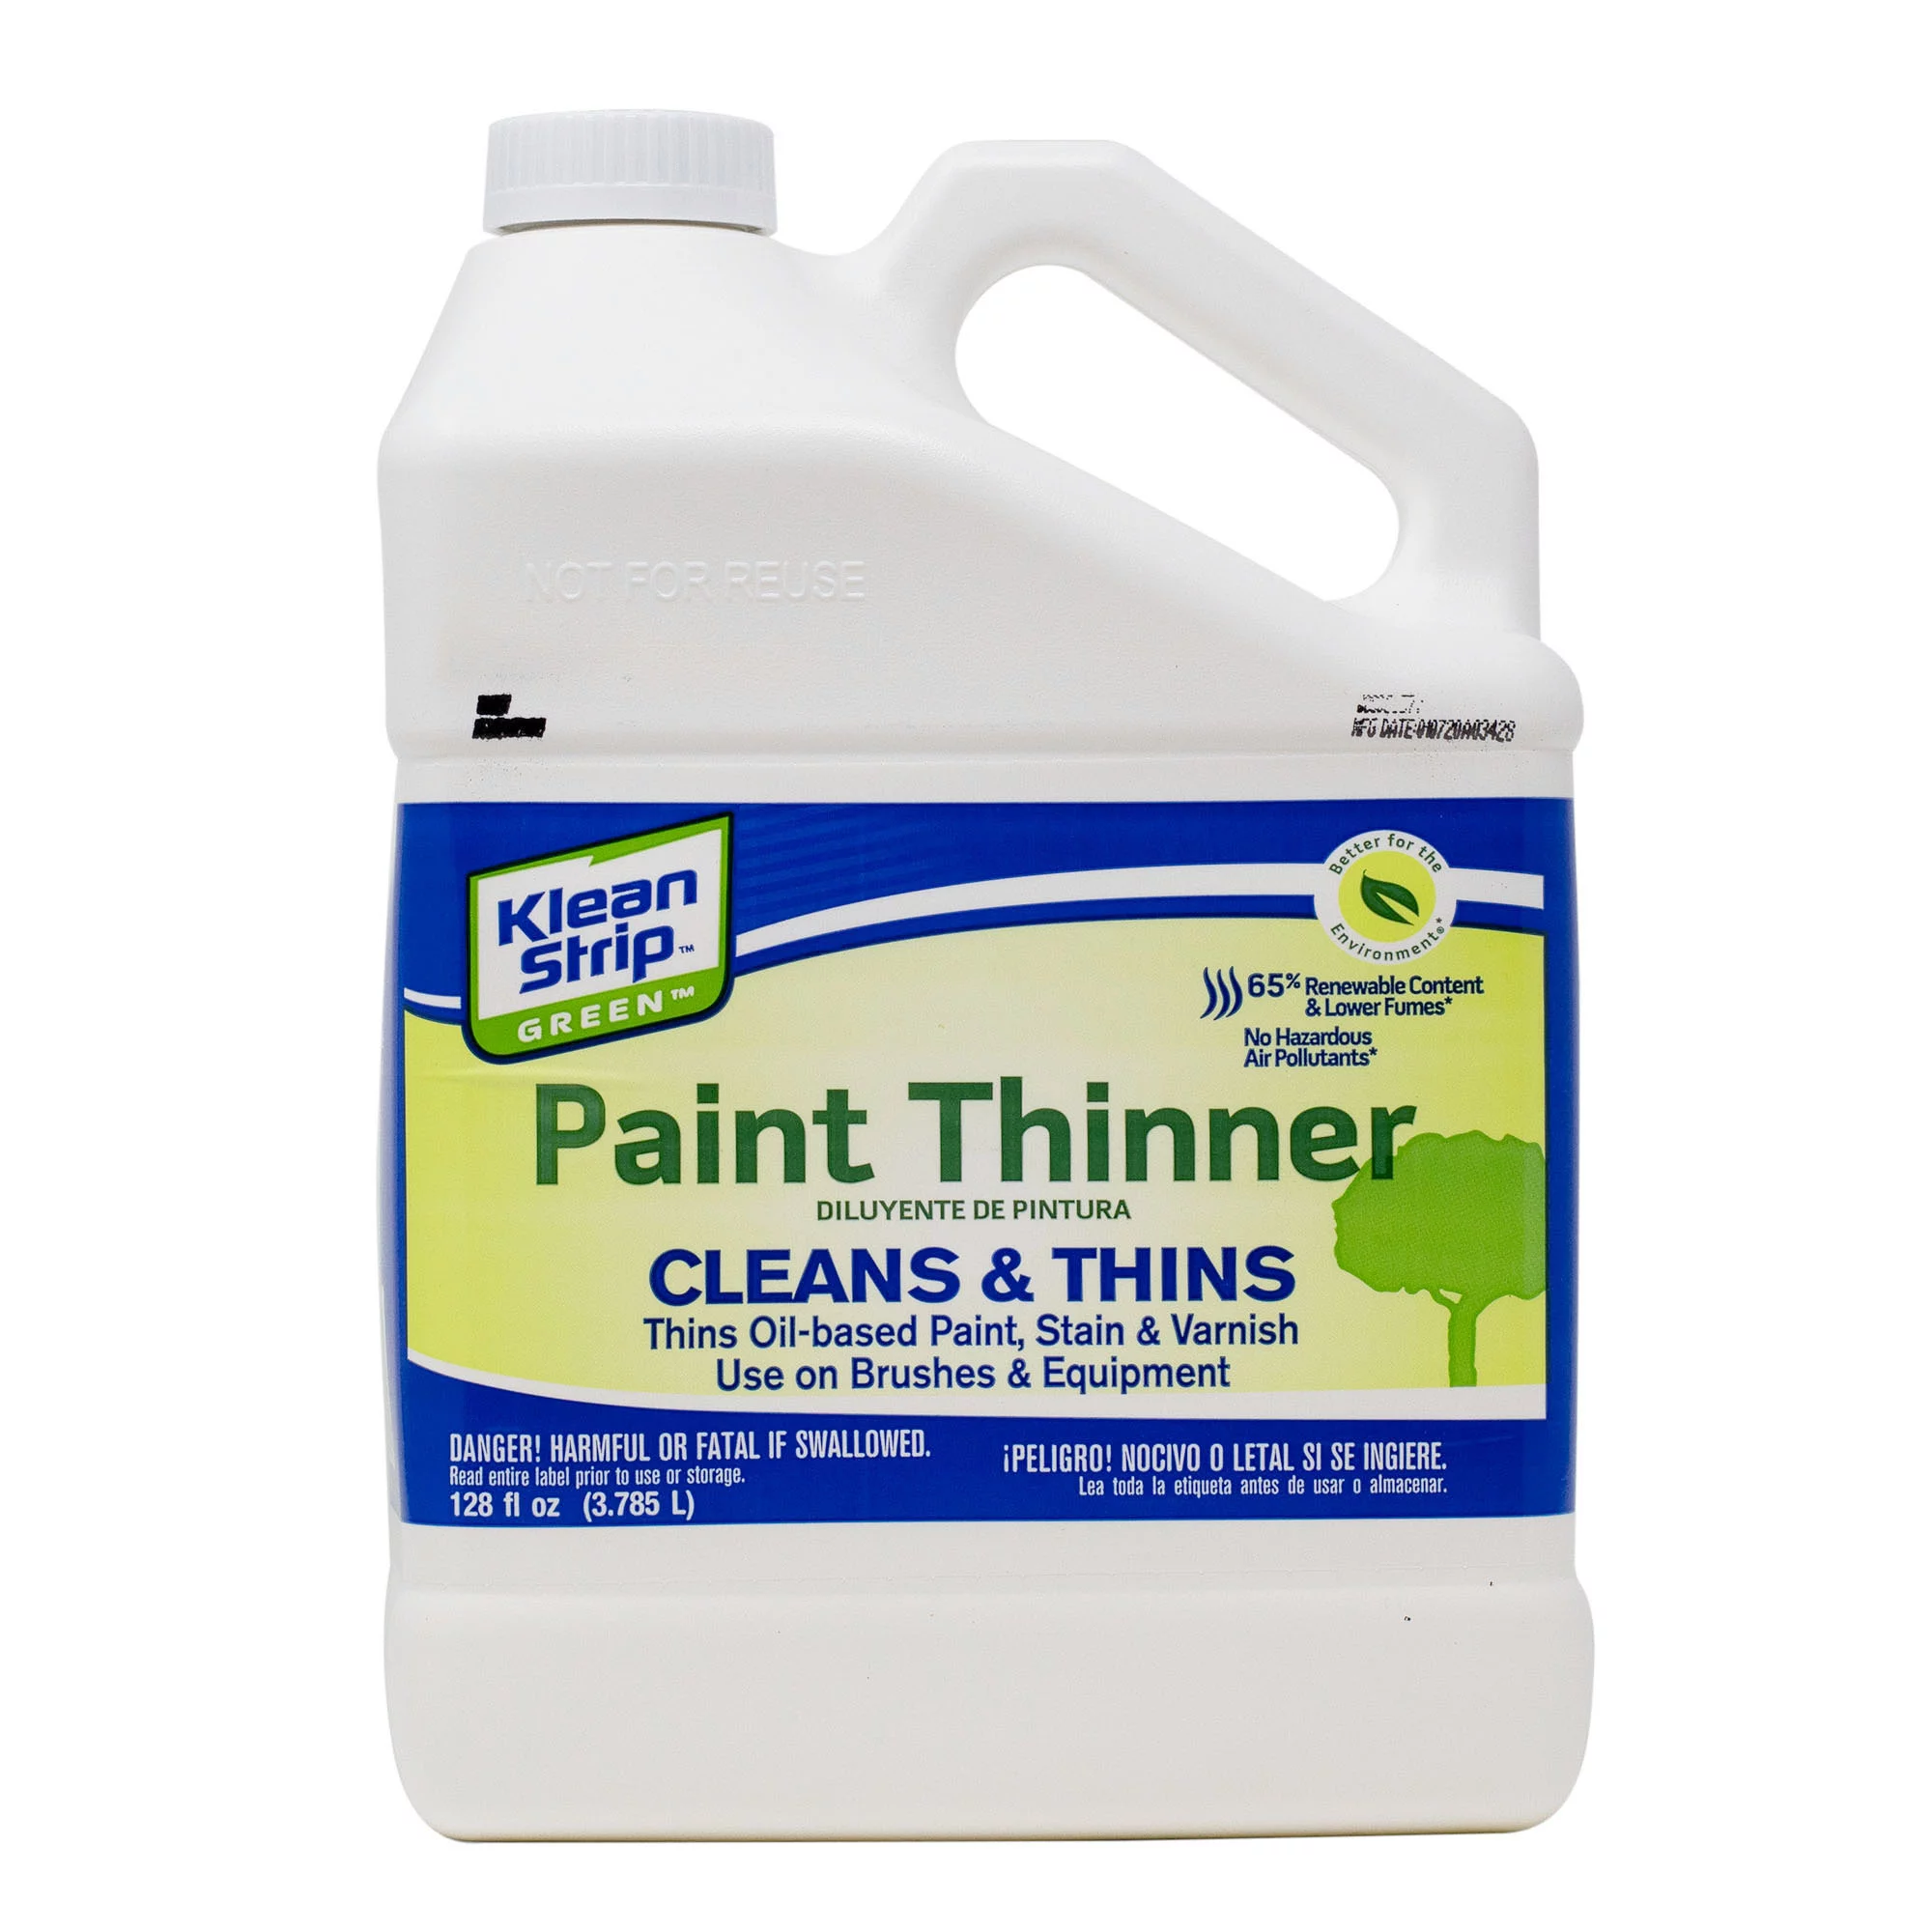 Centaurus AZ Klean Strip Paint Thinner 1 Gallon - Cleans Enamel Paint and Airbrushes Paint and Decrease Viscosity of Stain from Brushes and Art